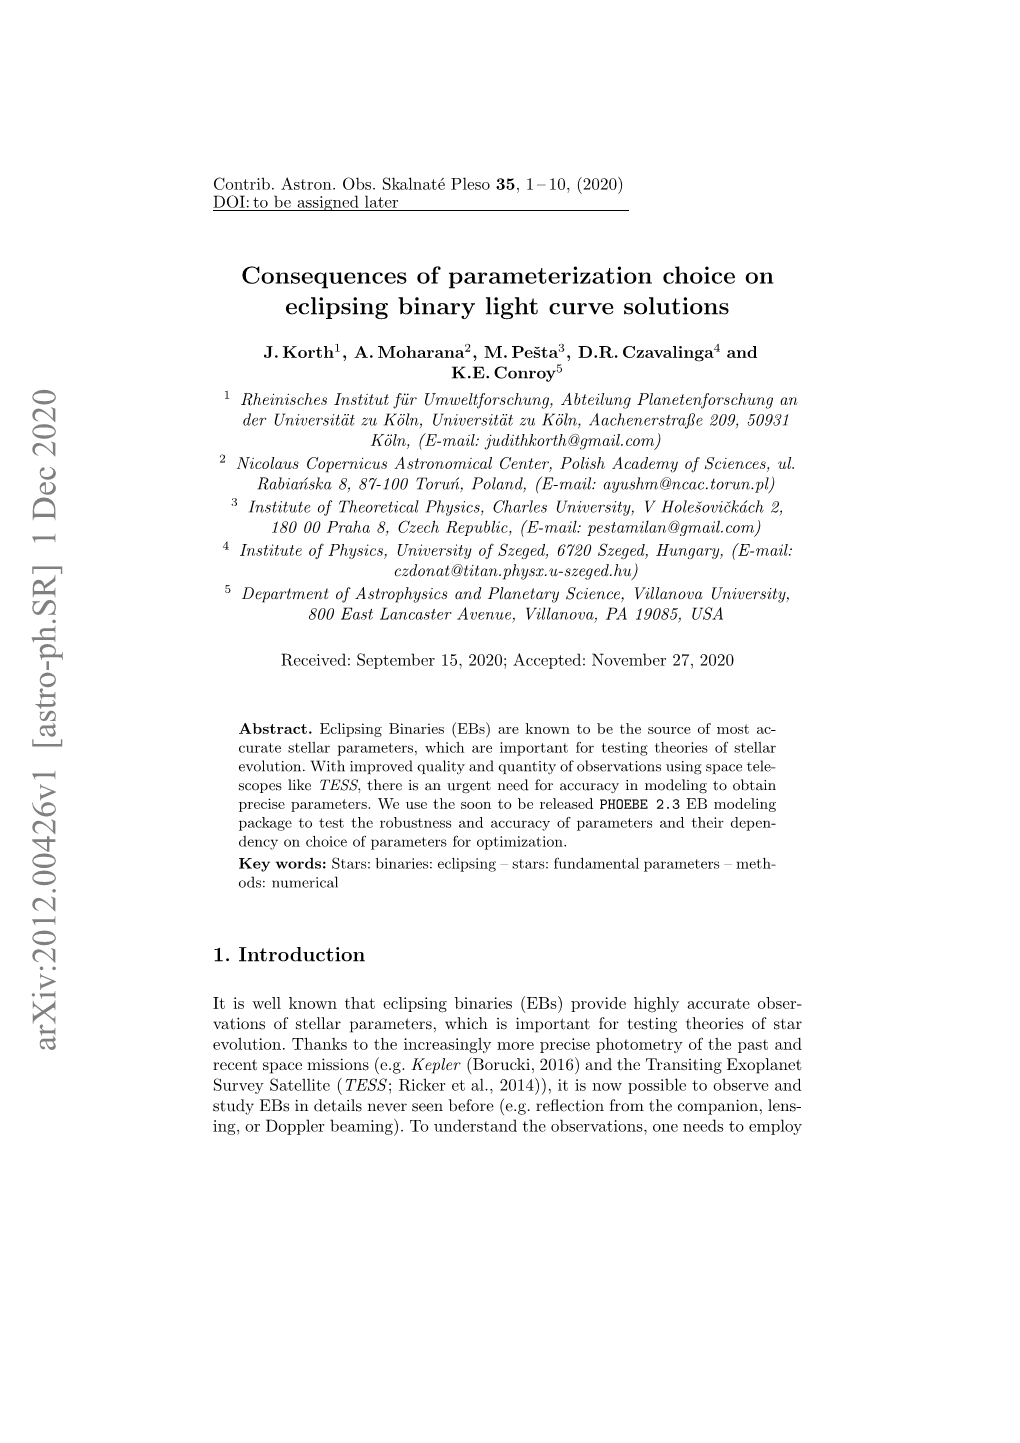 Consequences of Parameterization Choice on Eclipsing Binary Light Curve Solutions 3